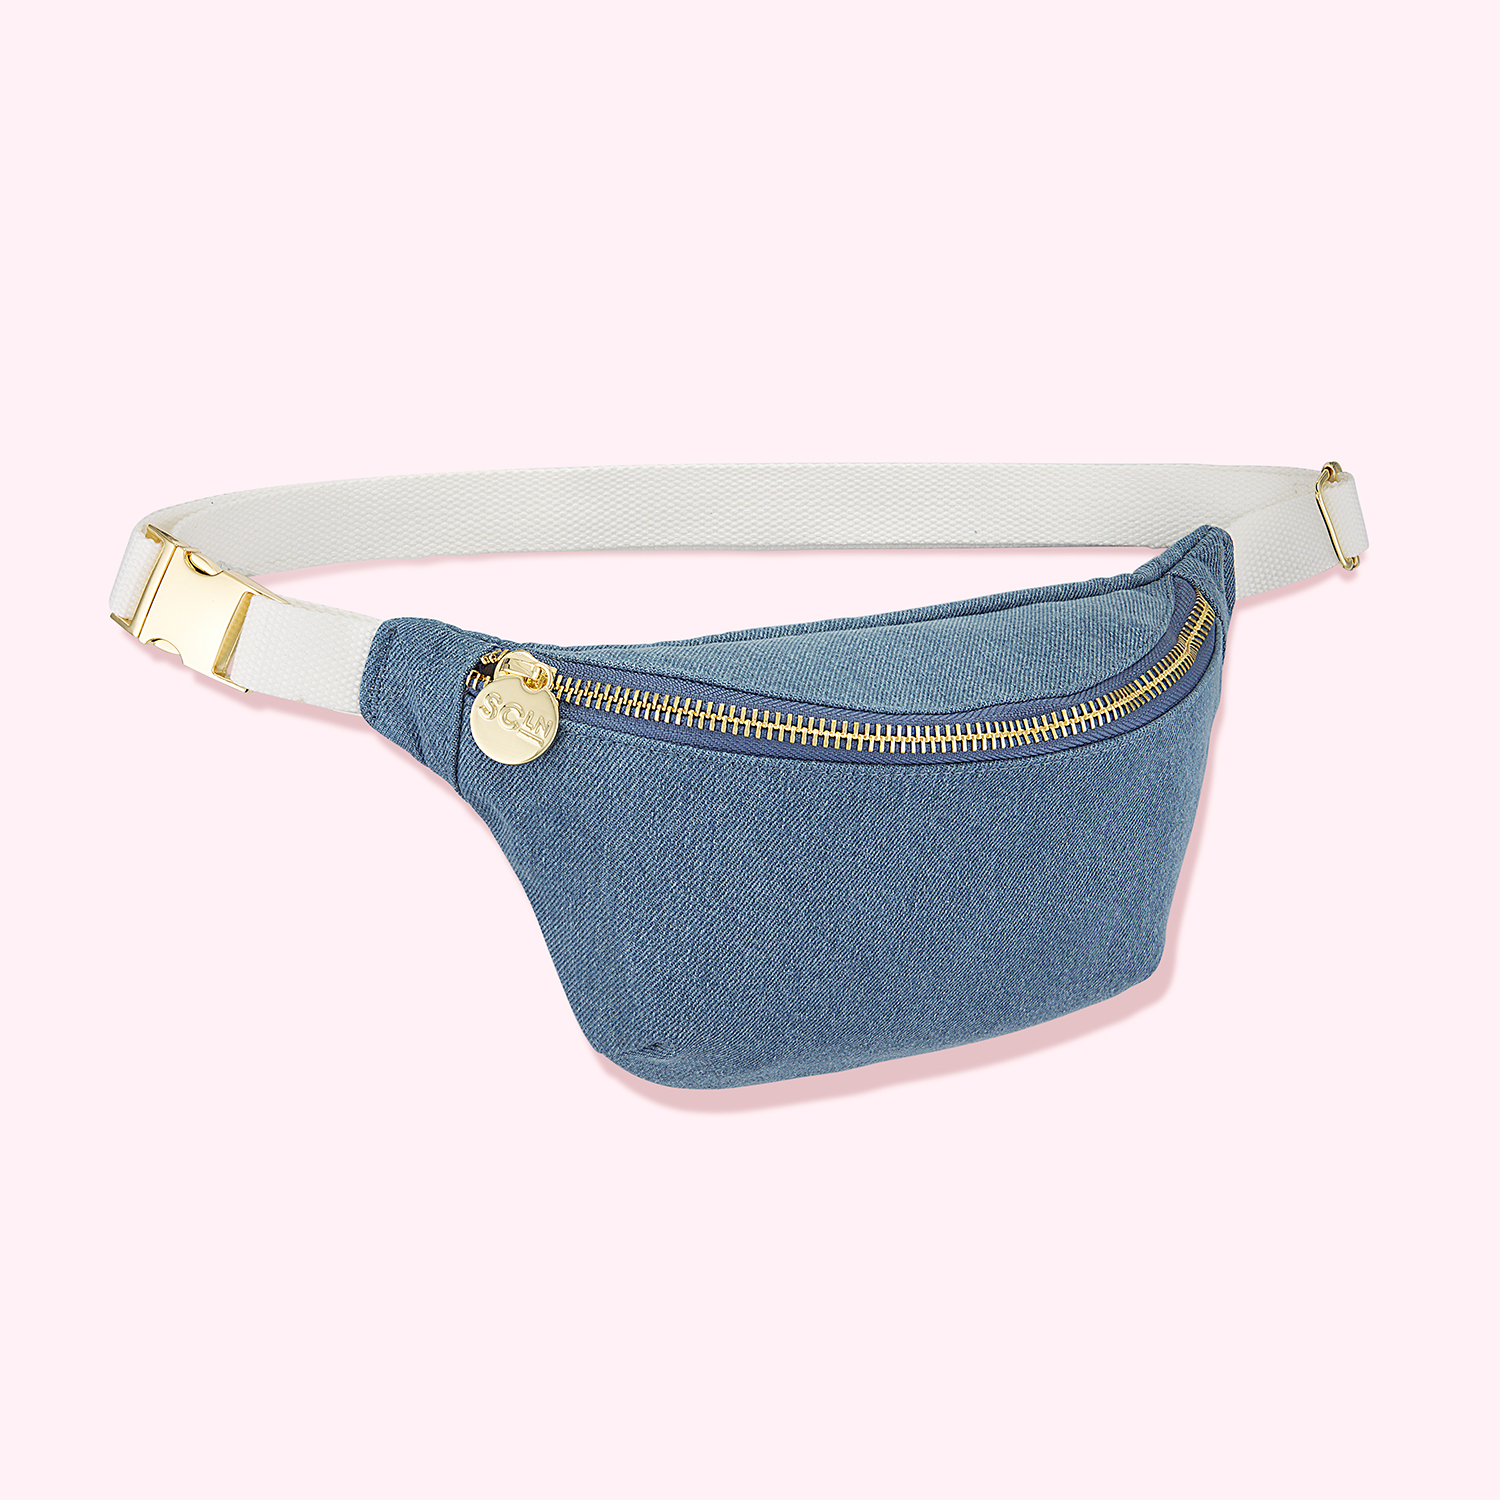 Fanny Pack / Moon Bag Graphic by Make it in denim School · Creative Fabrica